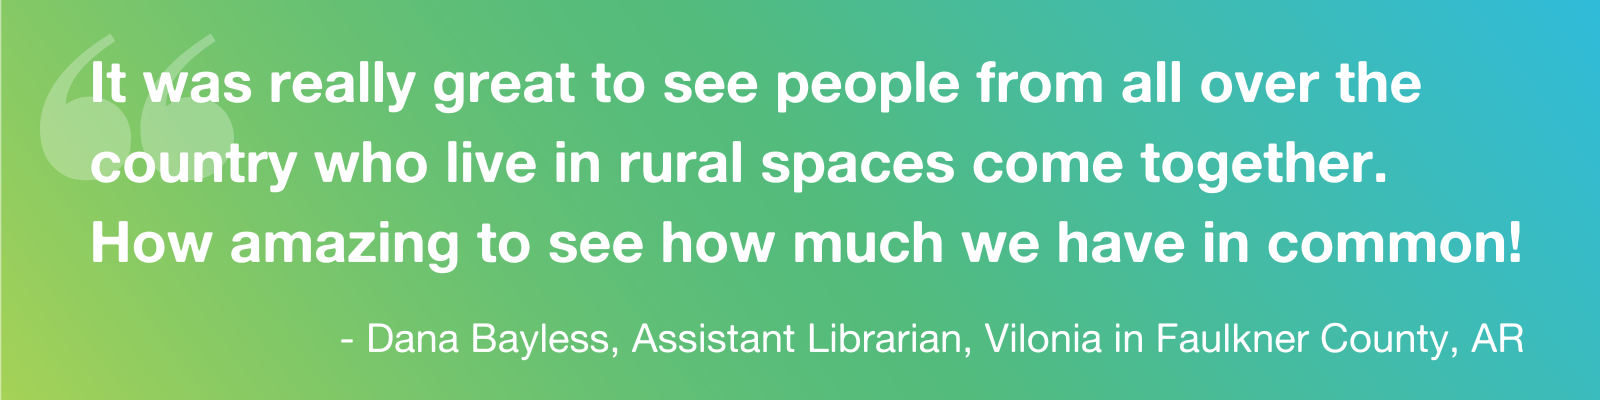 Quote: It was really great to see people from all over the country who live in rural spaces come together.  How amazing to see how much we have in common!" - Dana Bayless, Assistant Librarian, Vilonia in Faulkner County, AR